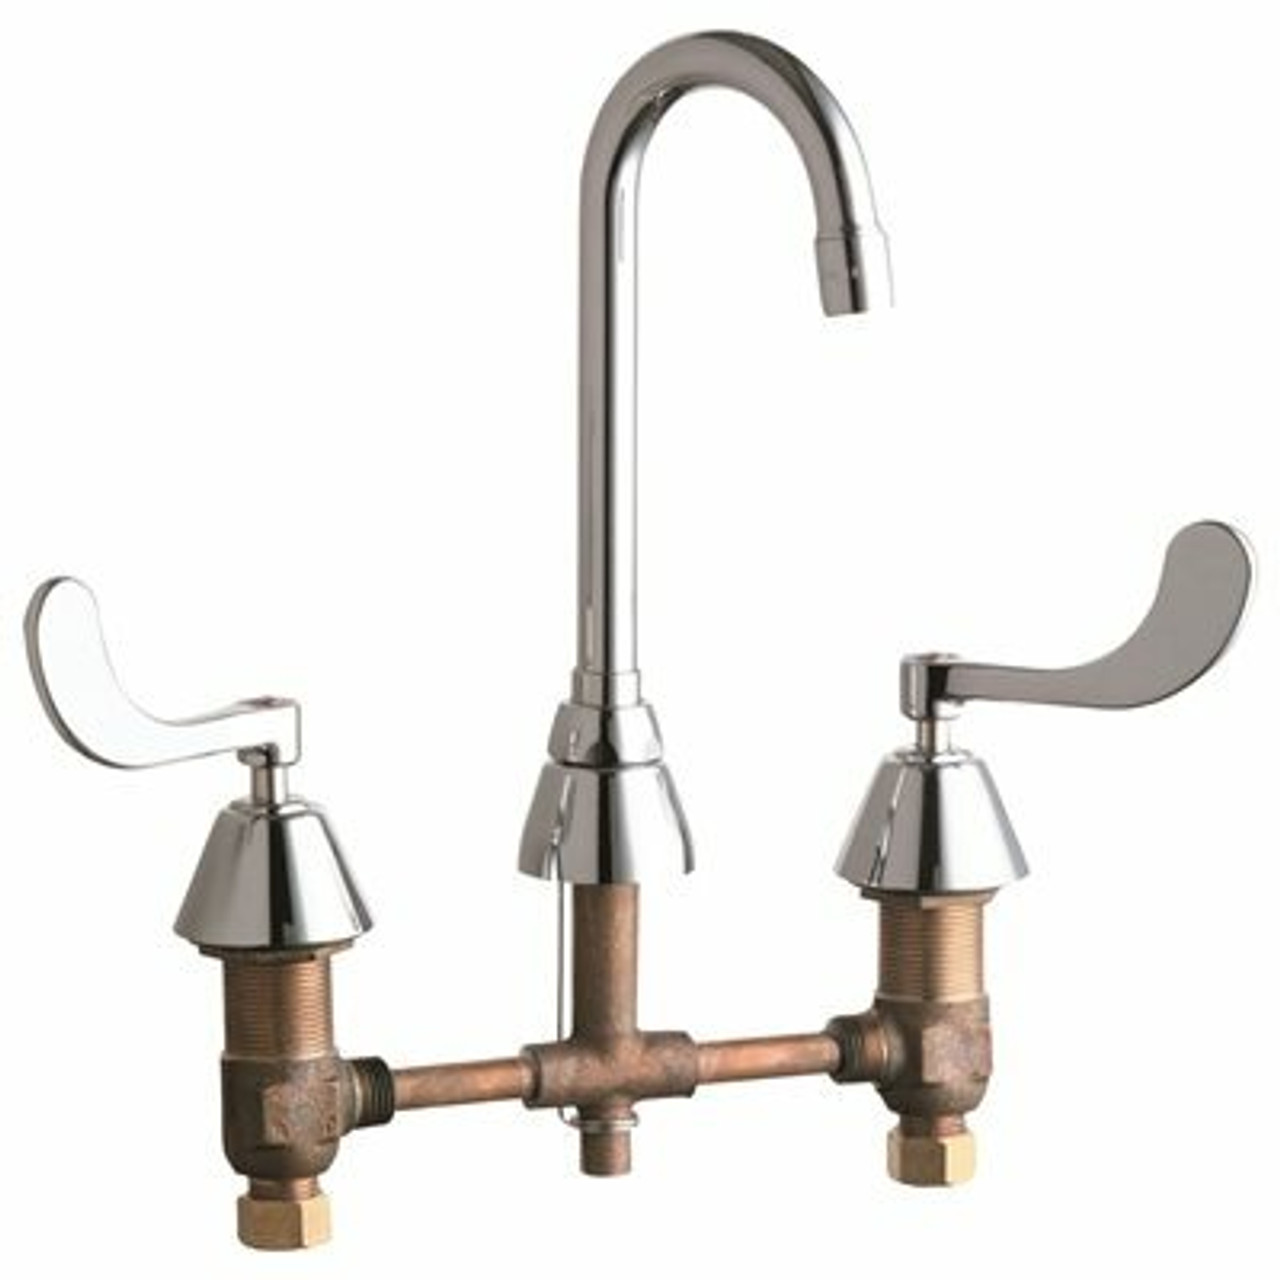 Chicago Faucets 8 In. Widespread 2-Handle High Arc Bathroom Faucet In Chrome With 3-1/2 In. Rigid/Swing Gooseneck Spout